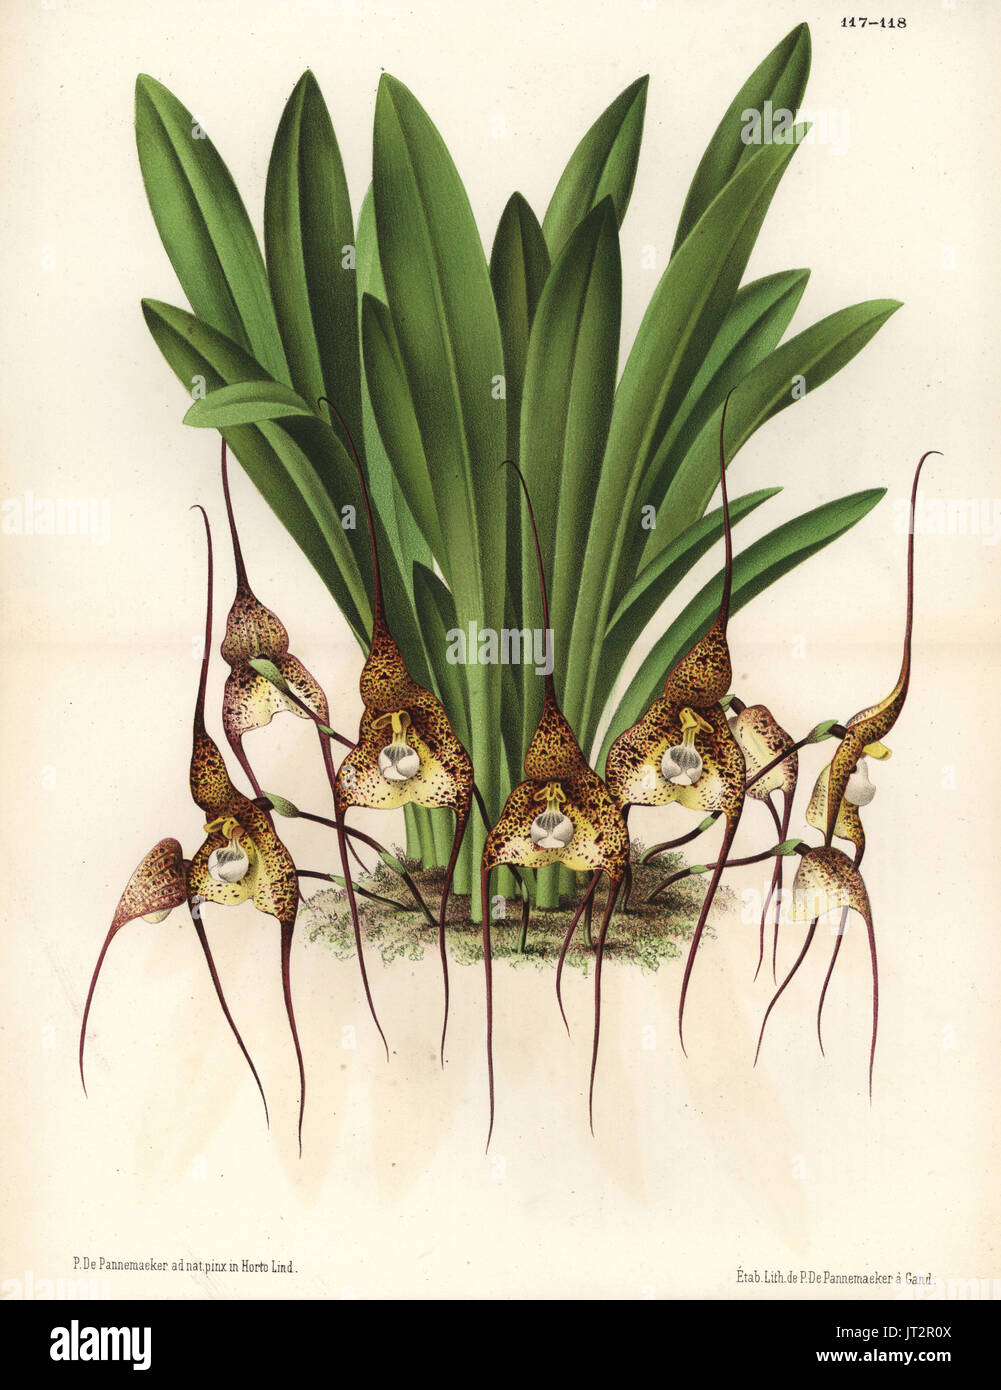 Dracula chimaera orchid (Masdevallia chimaera). Drawn and chromolithographed by P. de Pannemaeker from Jean Linden's l'Illustration Horticole, Brussels, 1873. Stock Photo